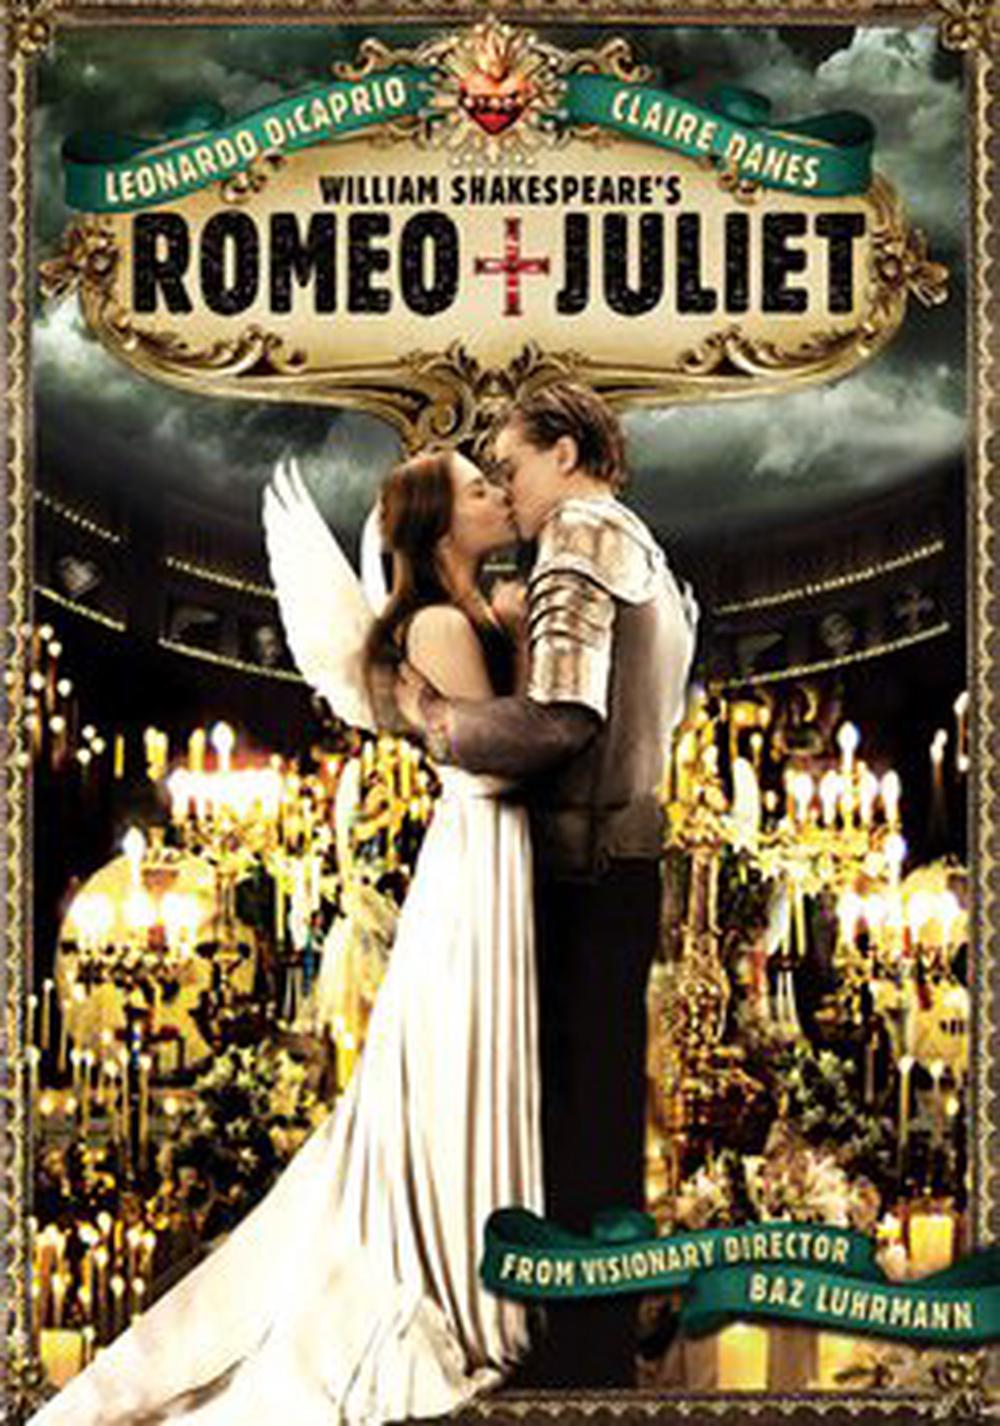 Romeo and Juliet Music Edition DVD Region 1 Free Shipping